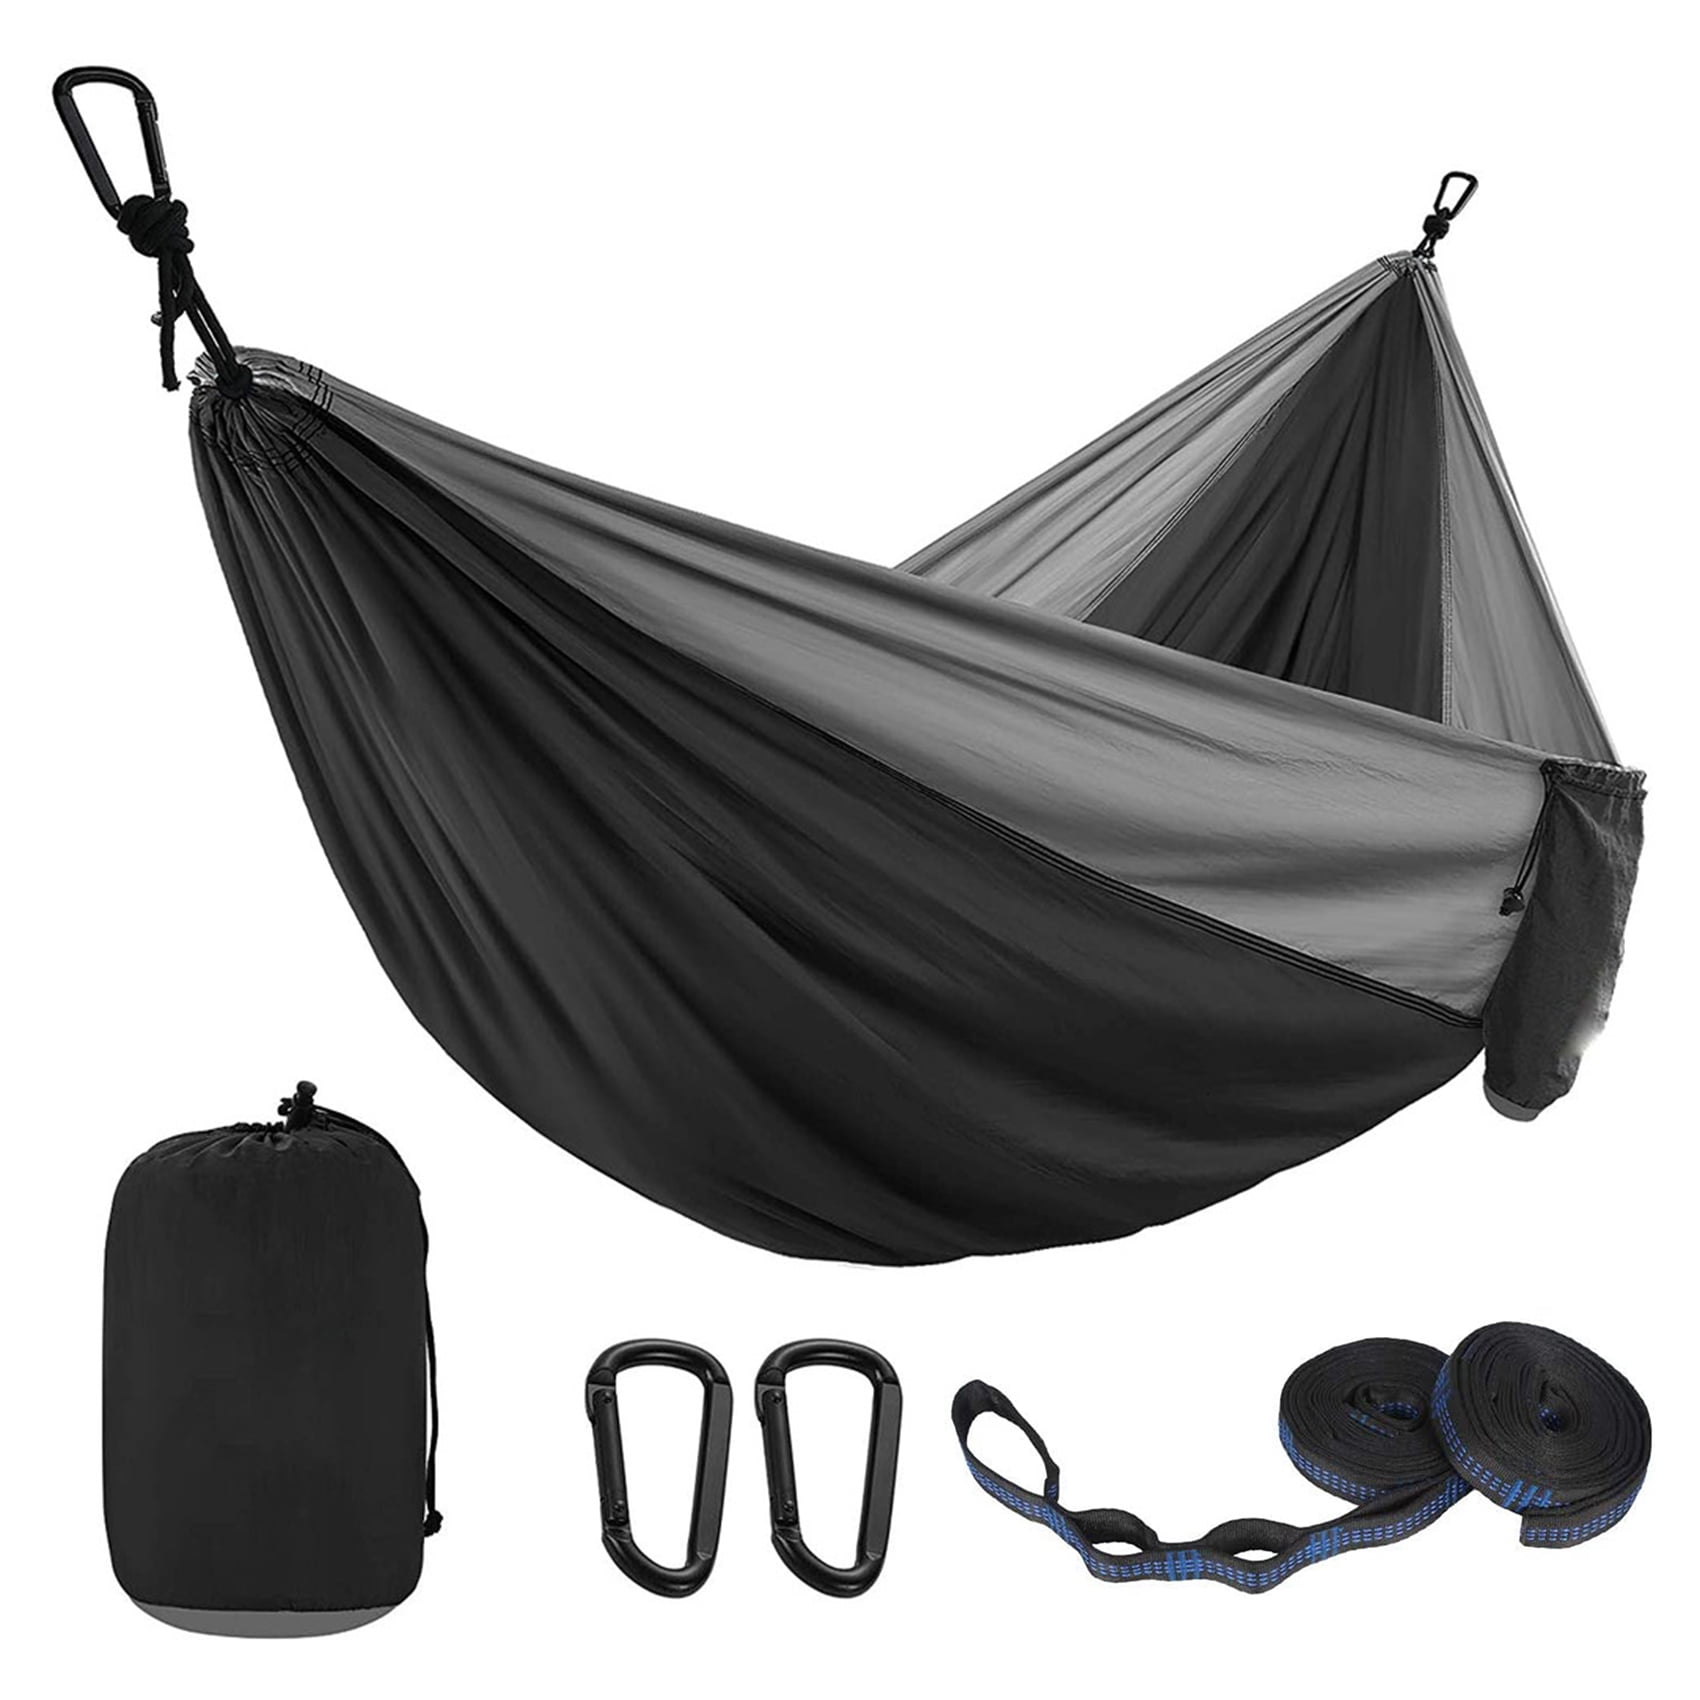 Backpacking Lightweight Portable Hammocks for Hiking Travel Backyard 210T Nylon Beach MAX Support 400lbs QF Single Camping Hammock with 10FT Tree Straps Indoor Outdoor 